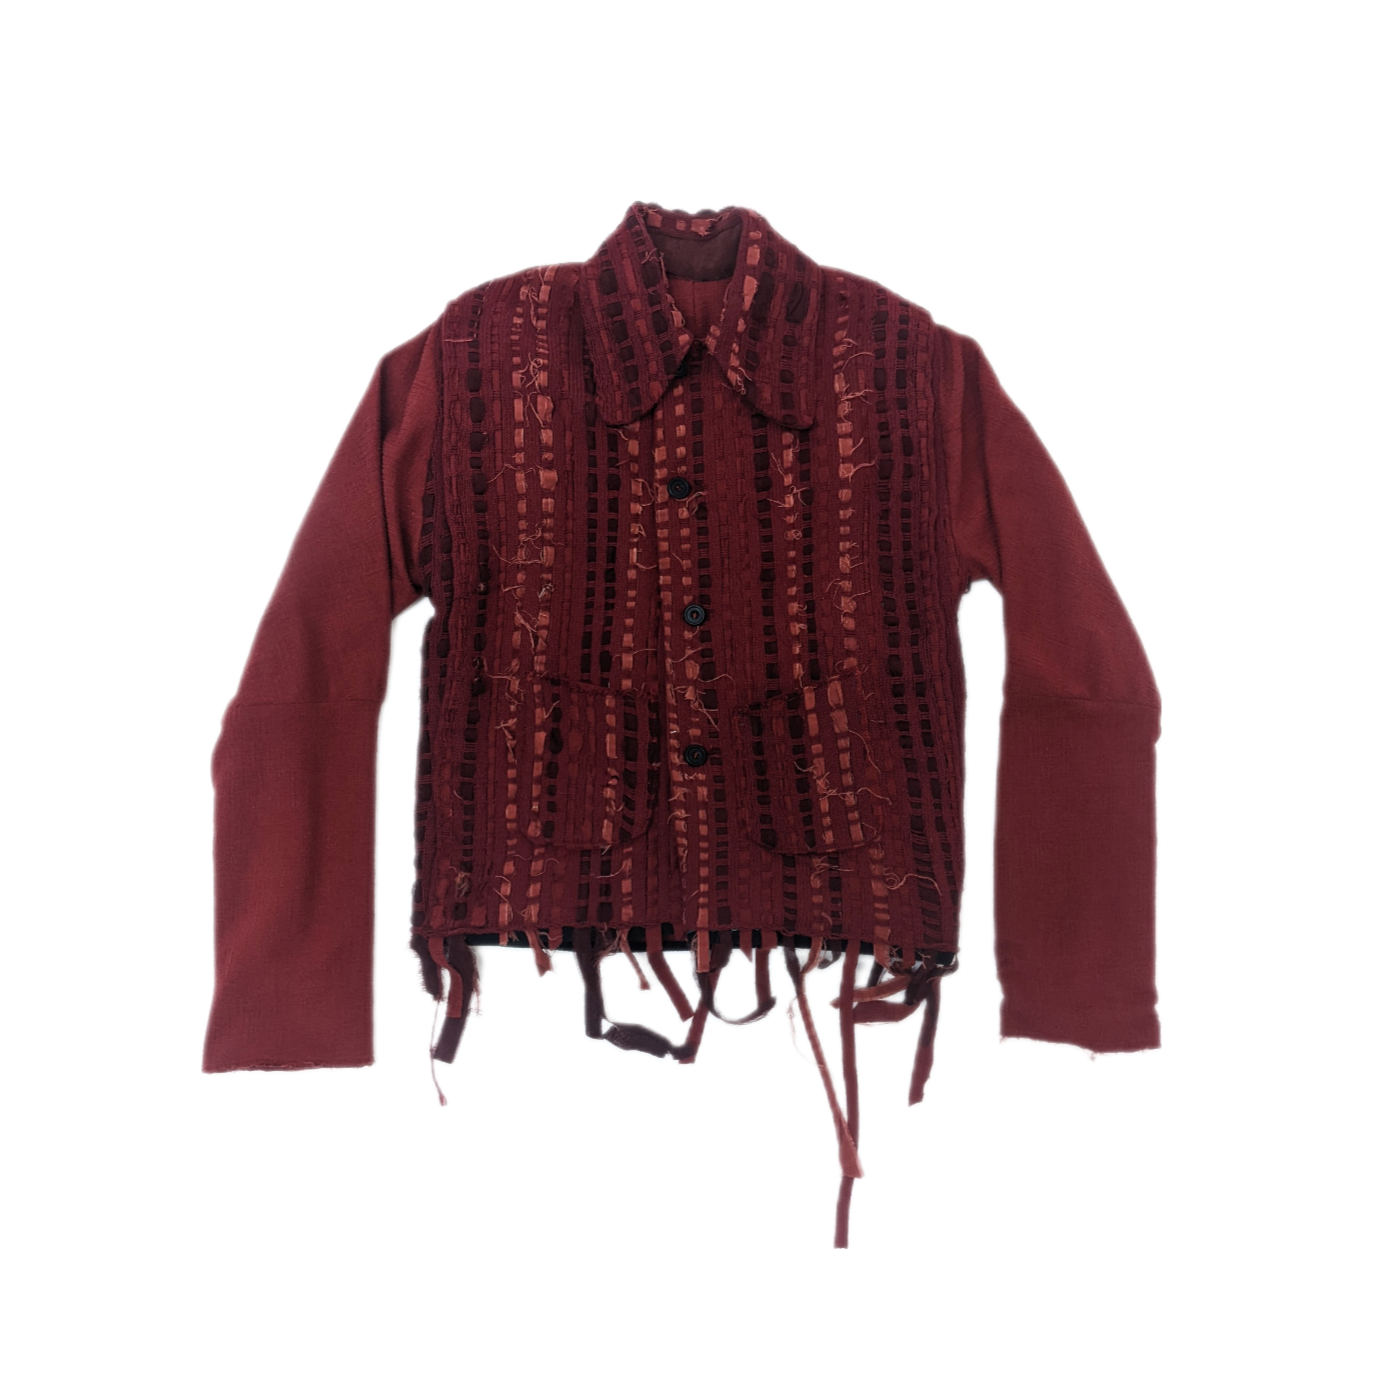 High Collar Kimono Back Jacket with Patched Pockets in Red Jersey & Knitted Fabric with Off-Cuts from the Atelier